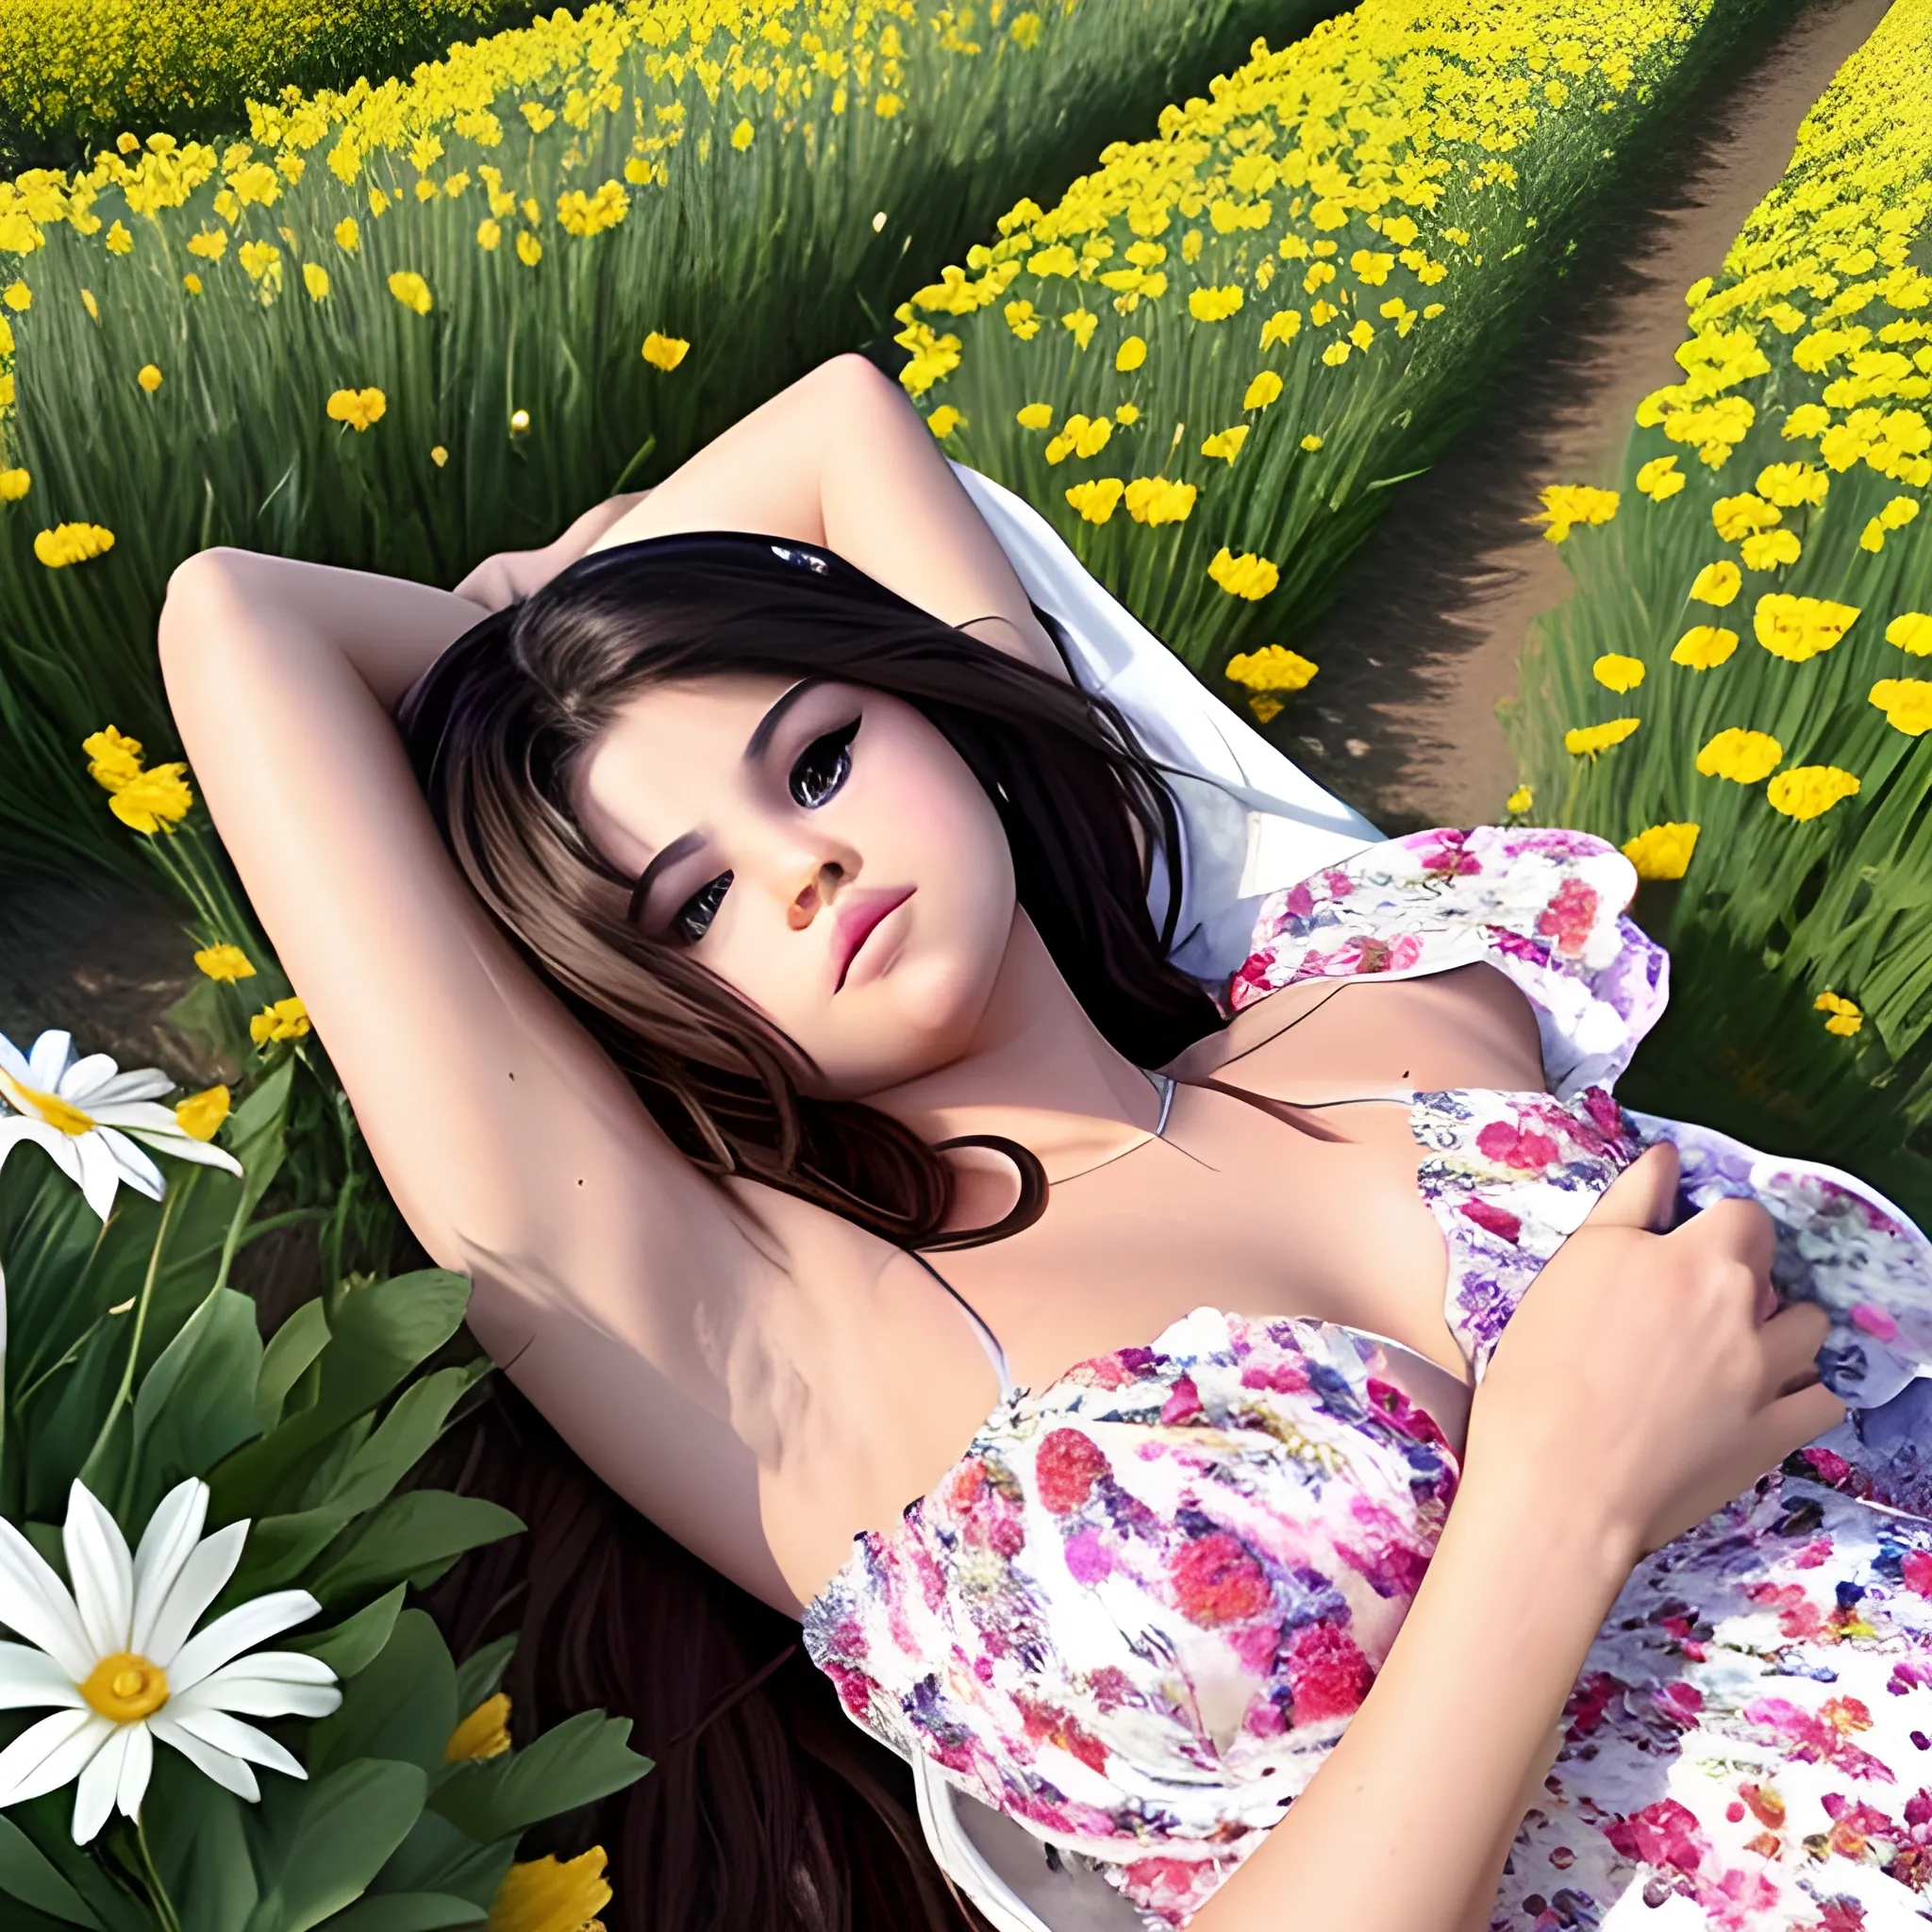 Selena gomez lying down in a flower field with her arms splayed above her head 